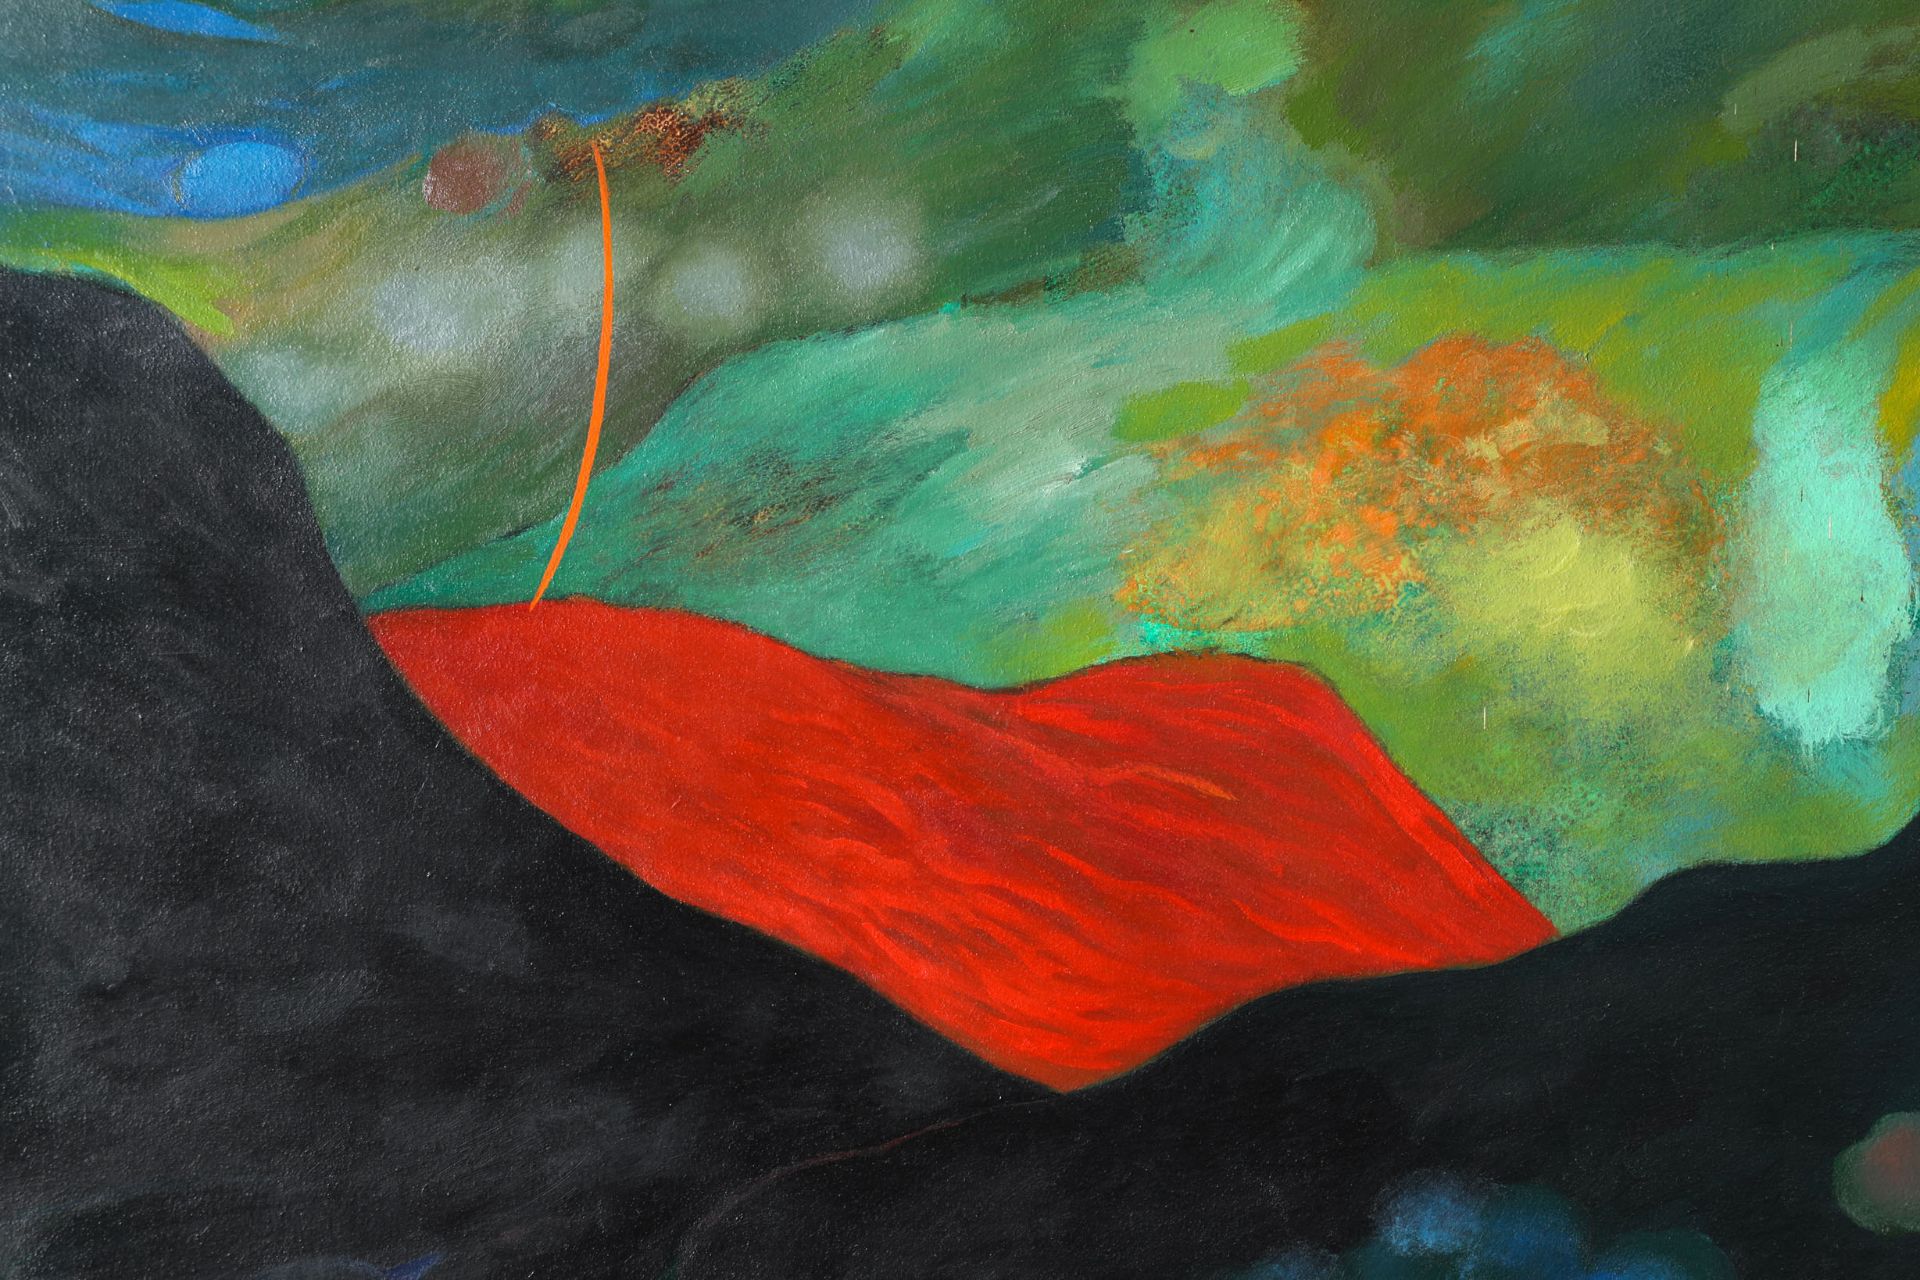 Om Prakash Sharma, On Top of the Clouds, 1991, Oil on canvas - Image 3 of 8